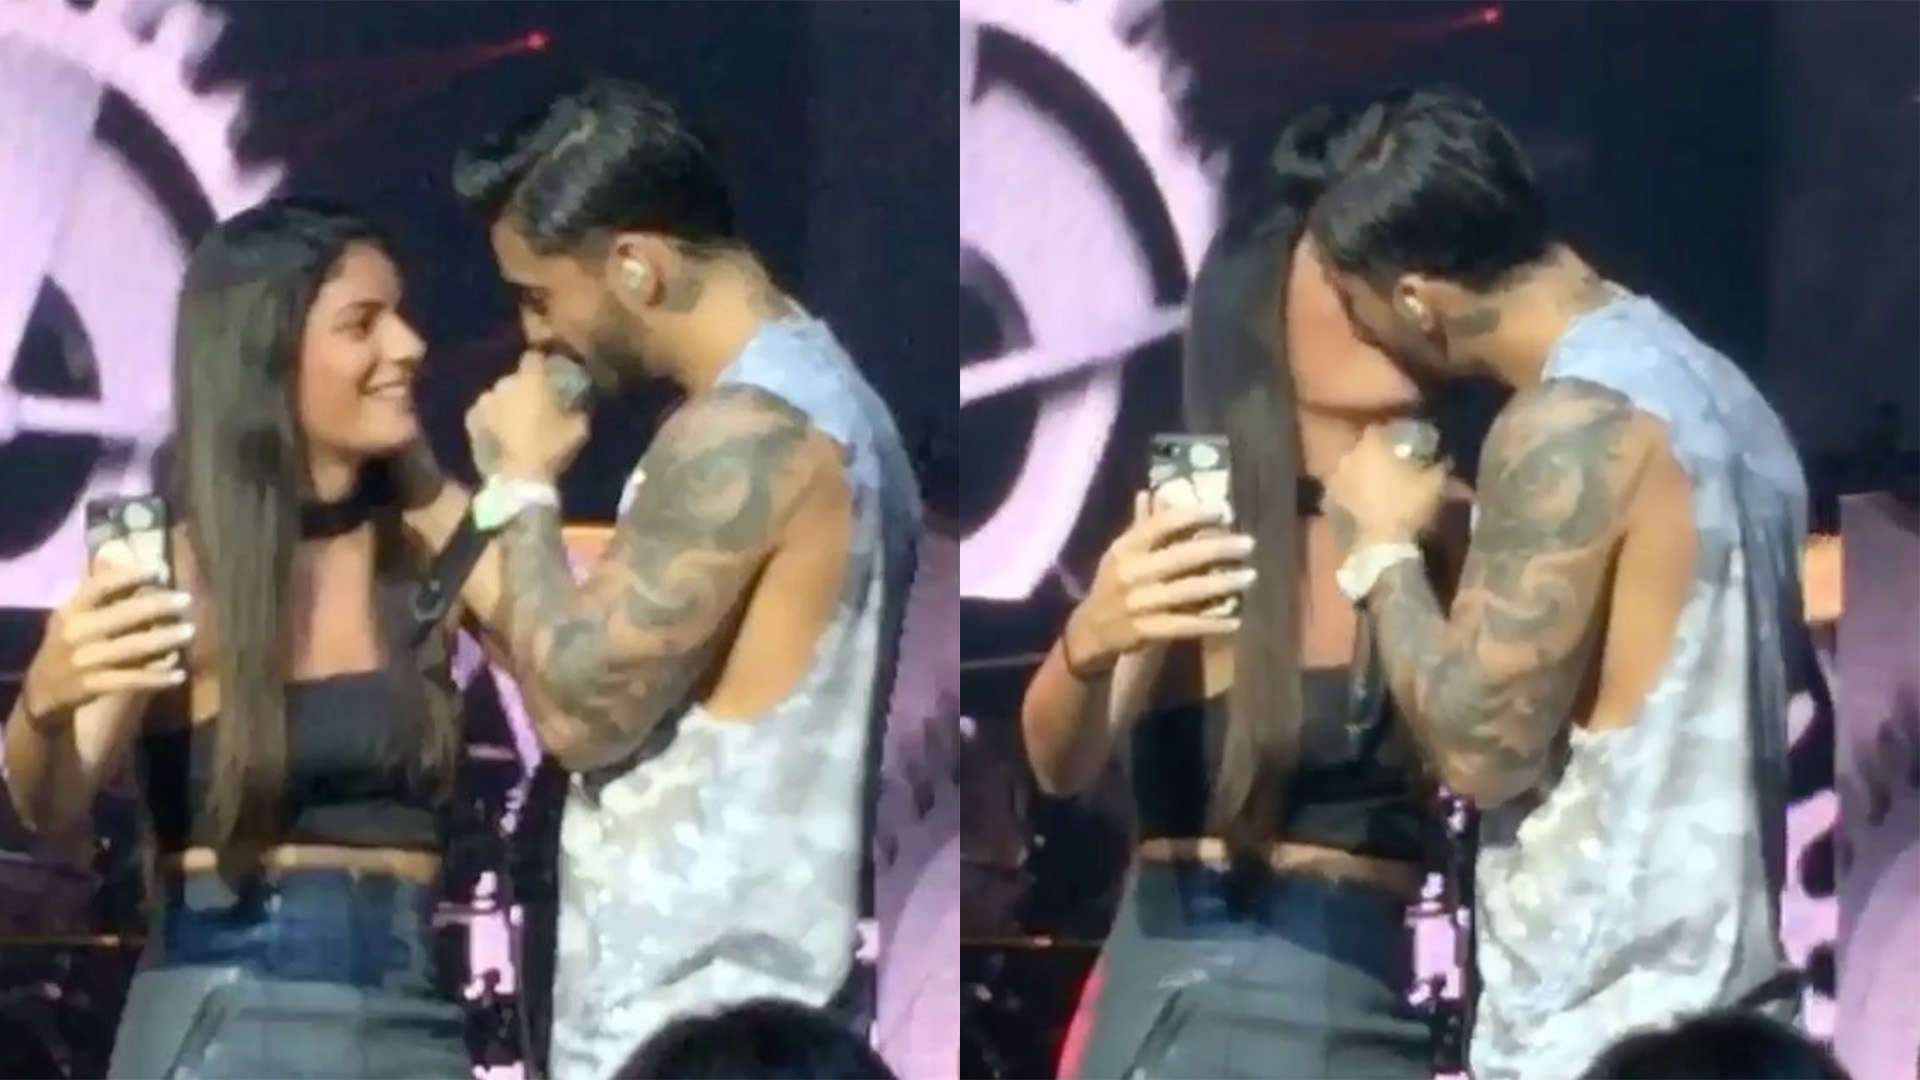 While Maluma was on tour in Miami, he invited one lucky fan on stage and sh...